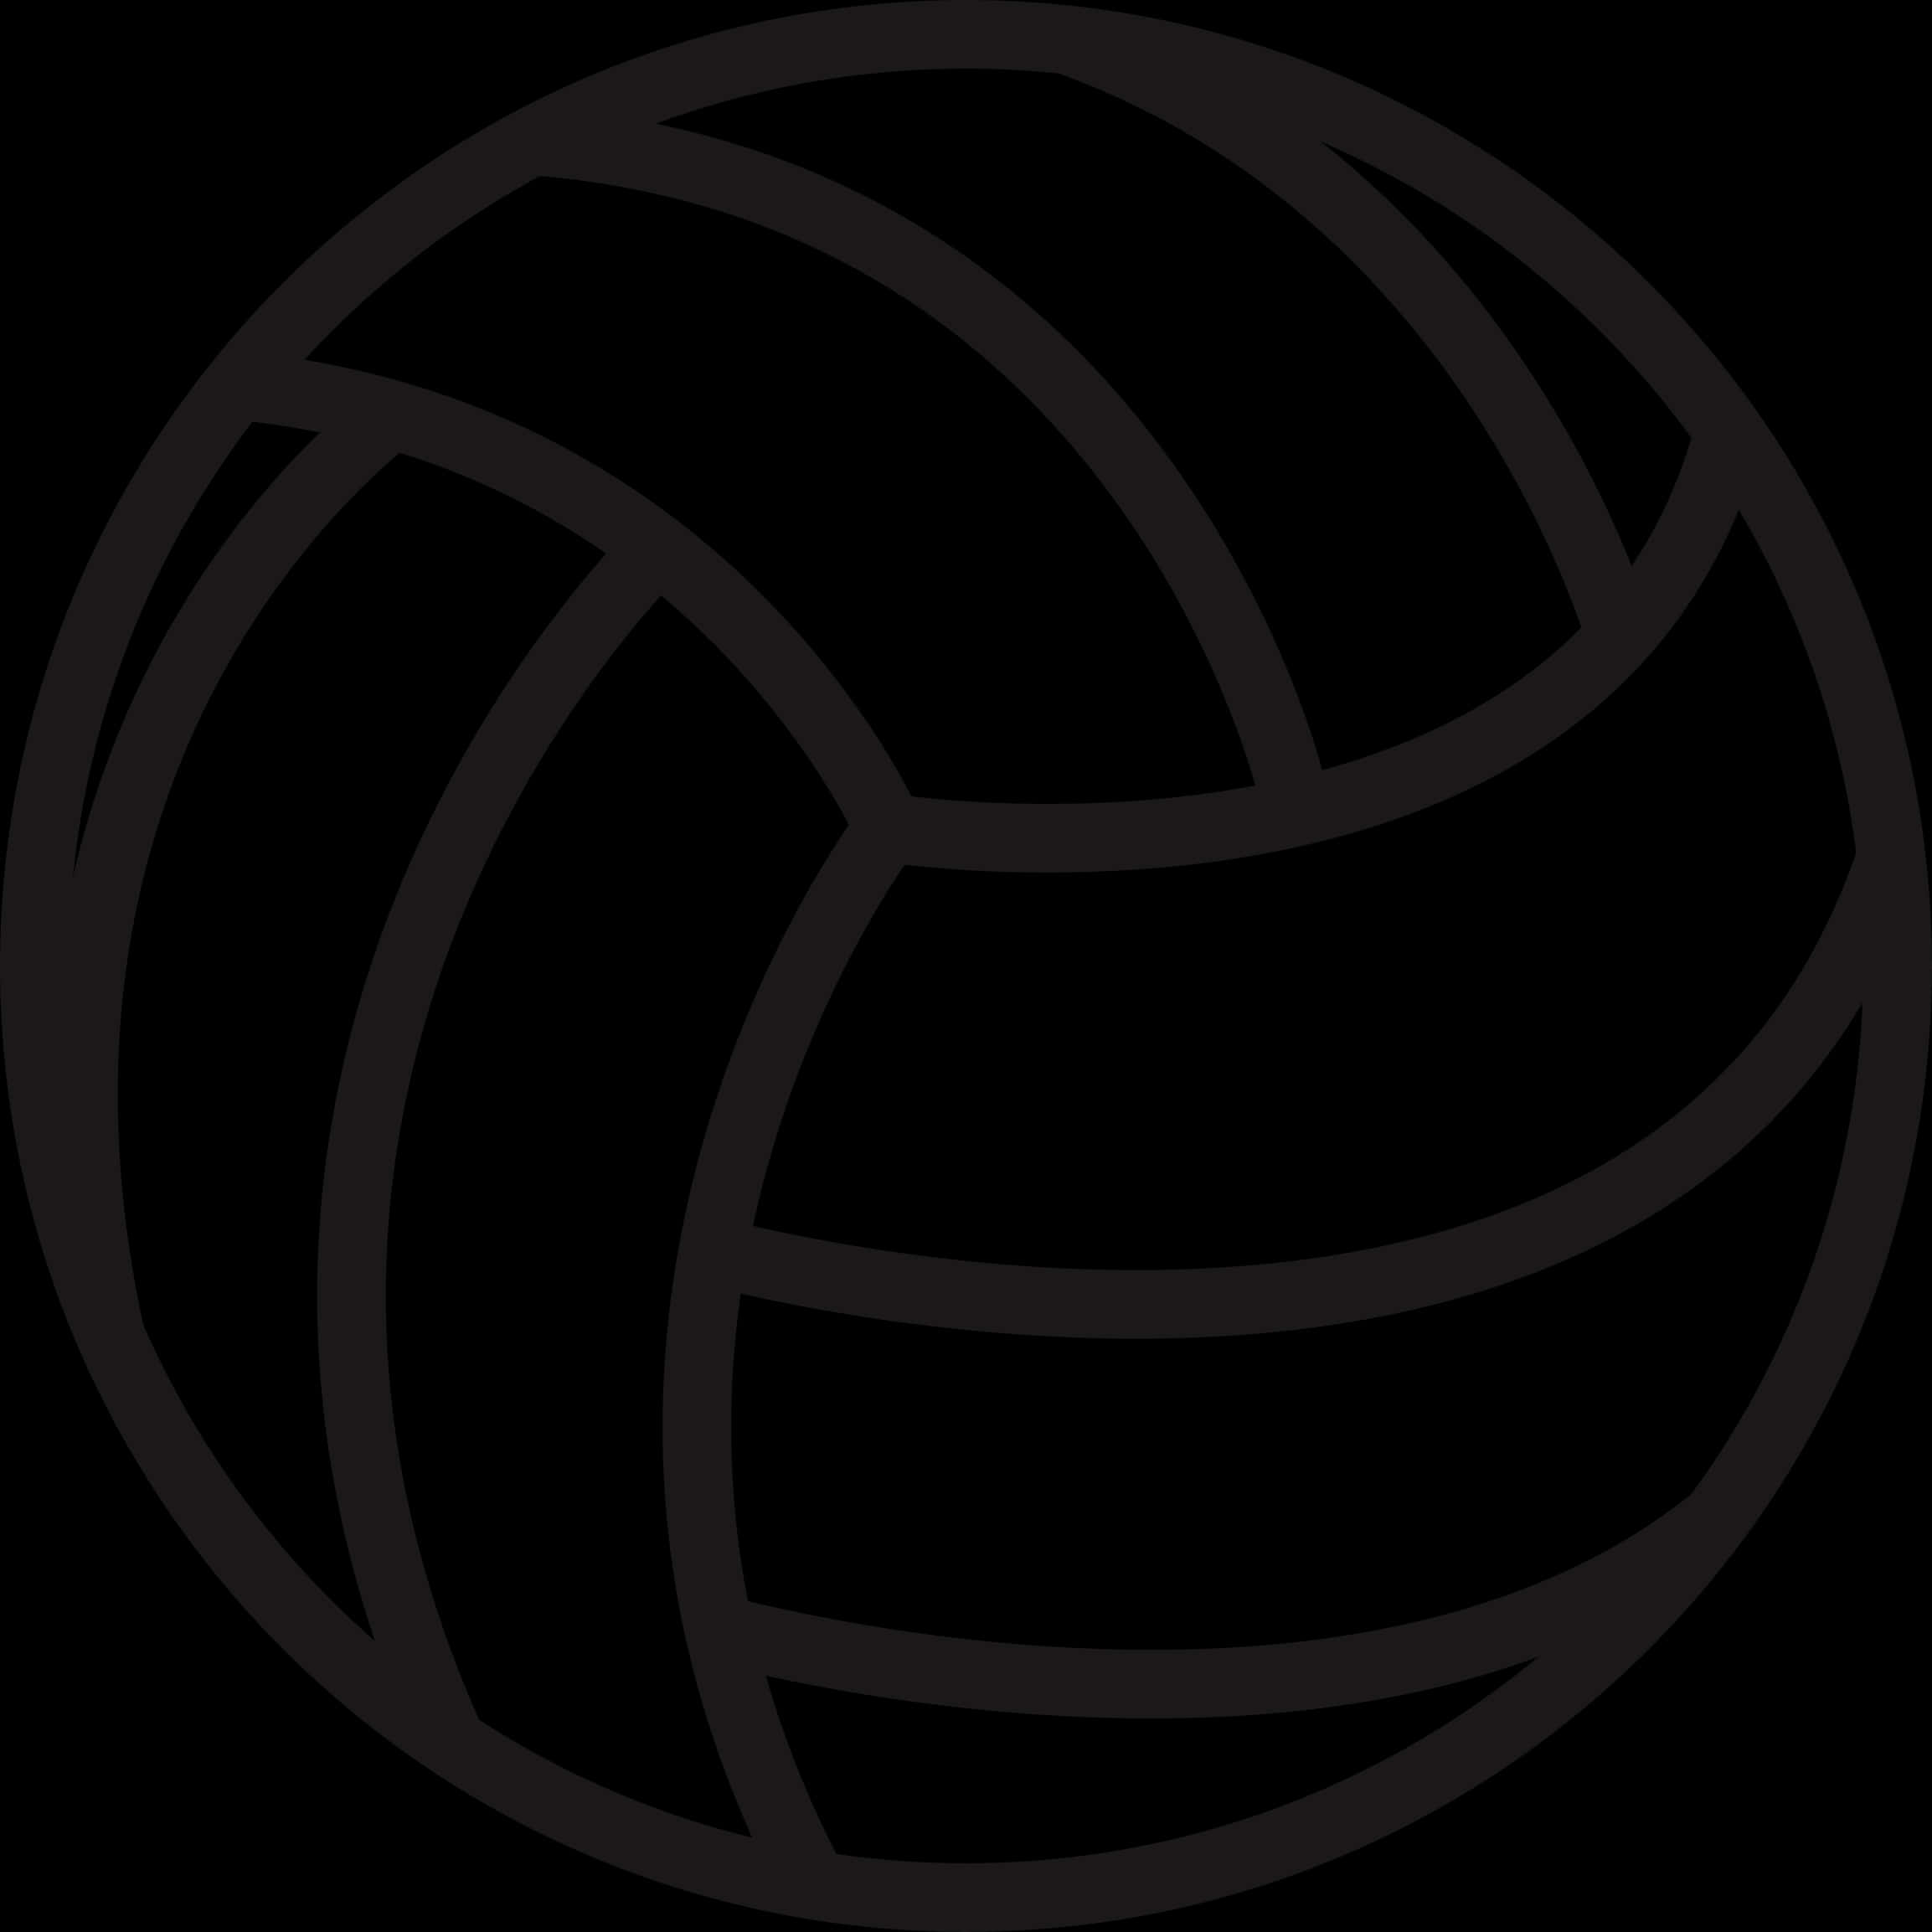 Volleyball Icon Blackand White PNG